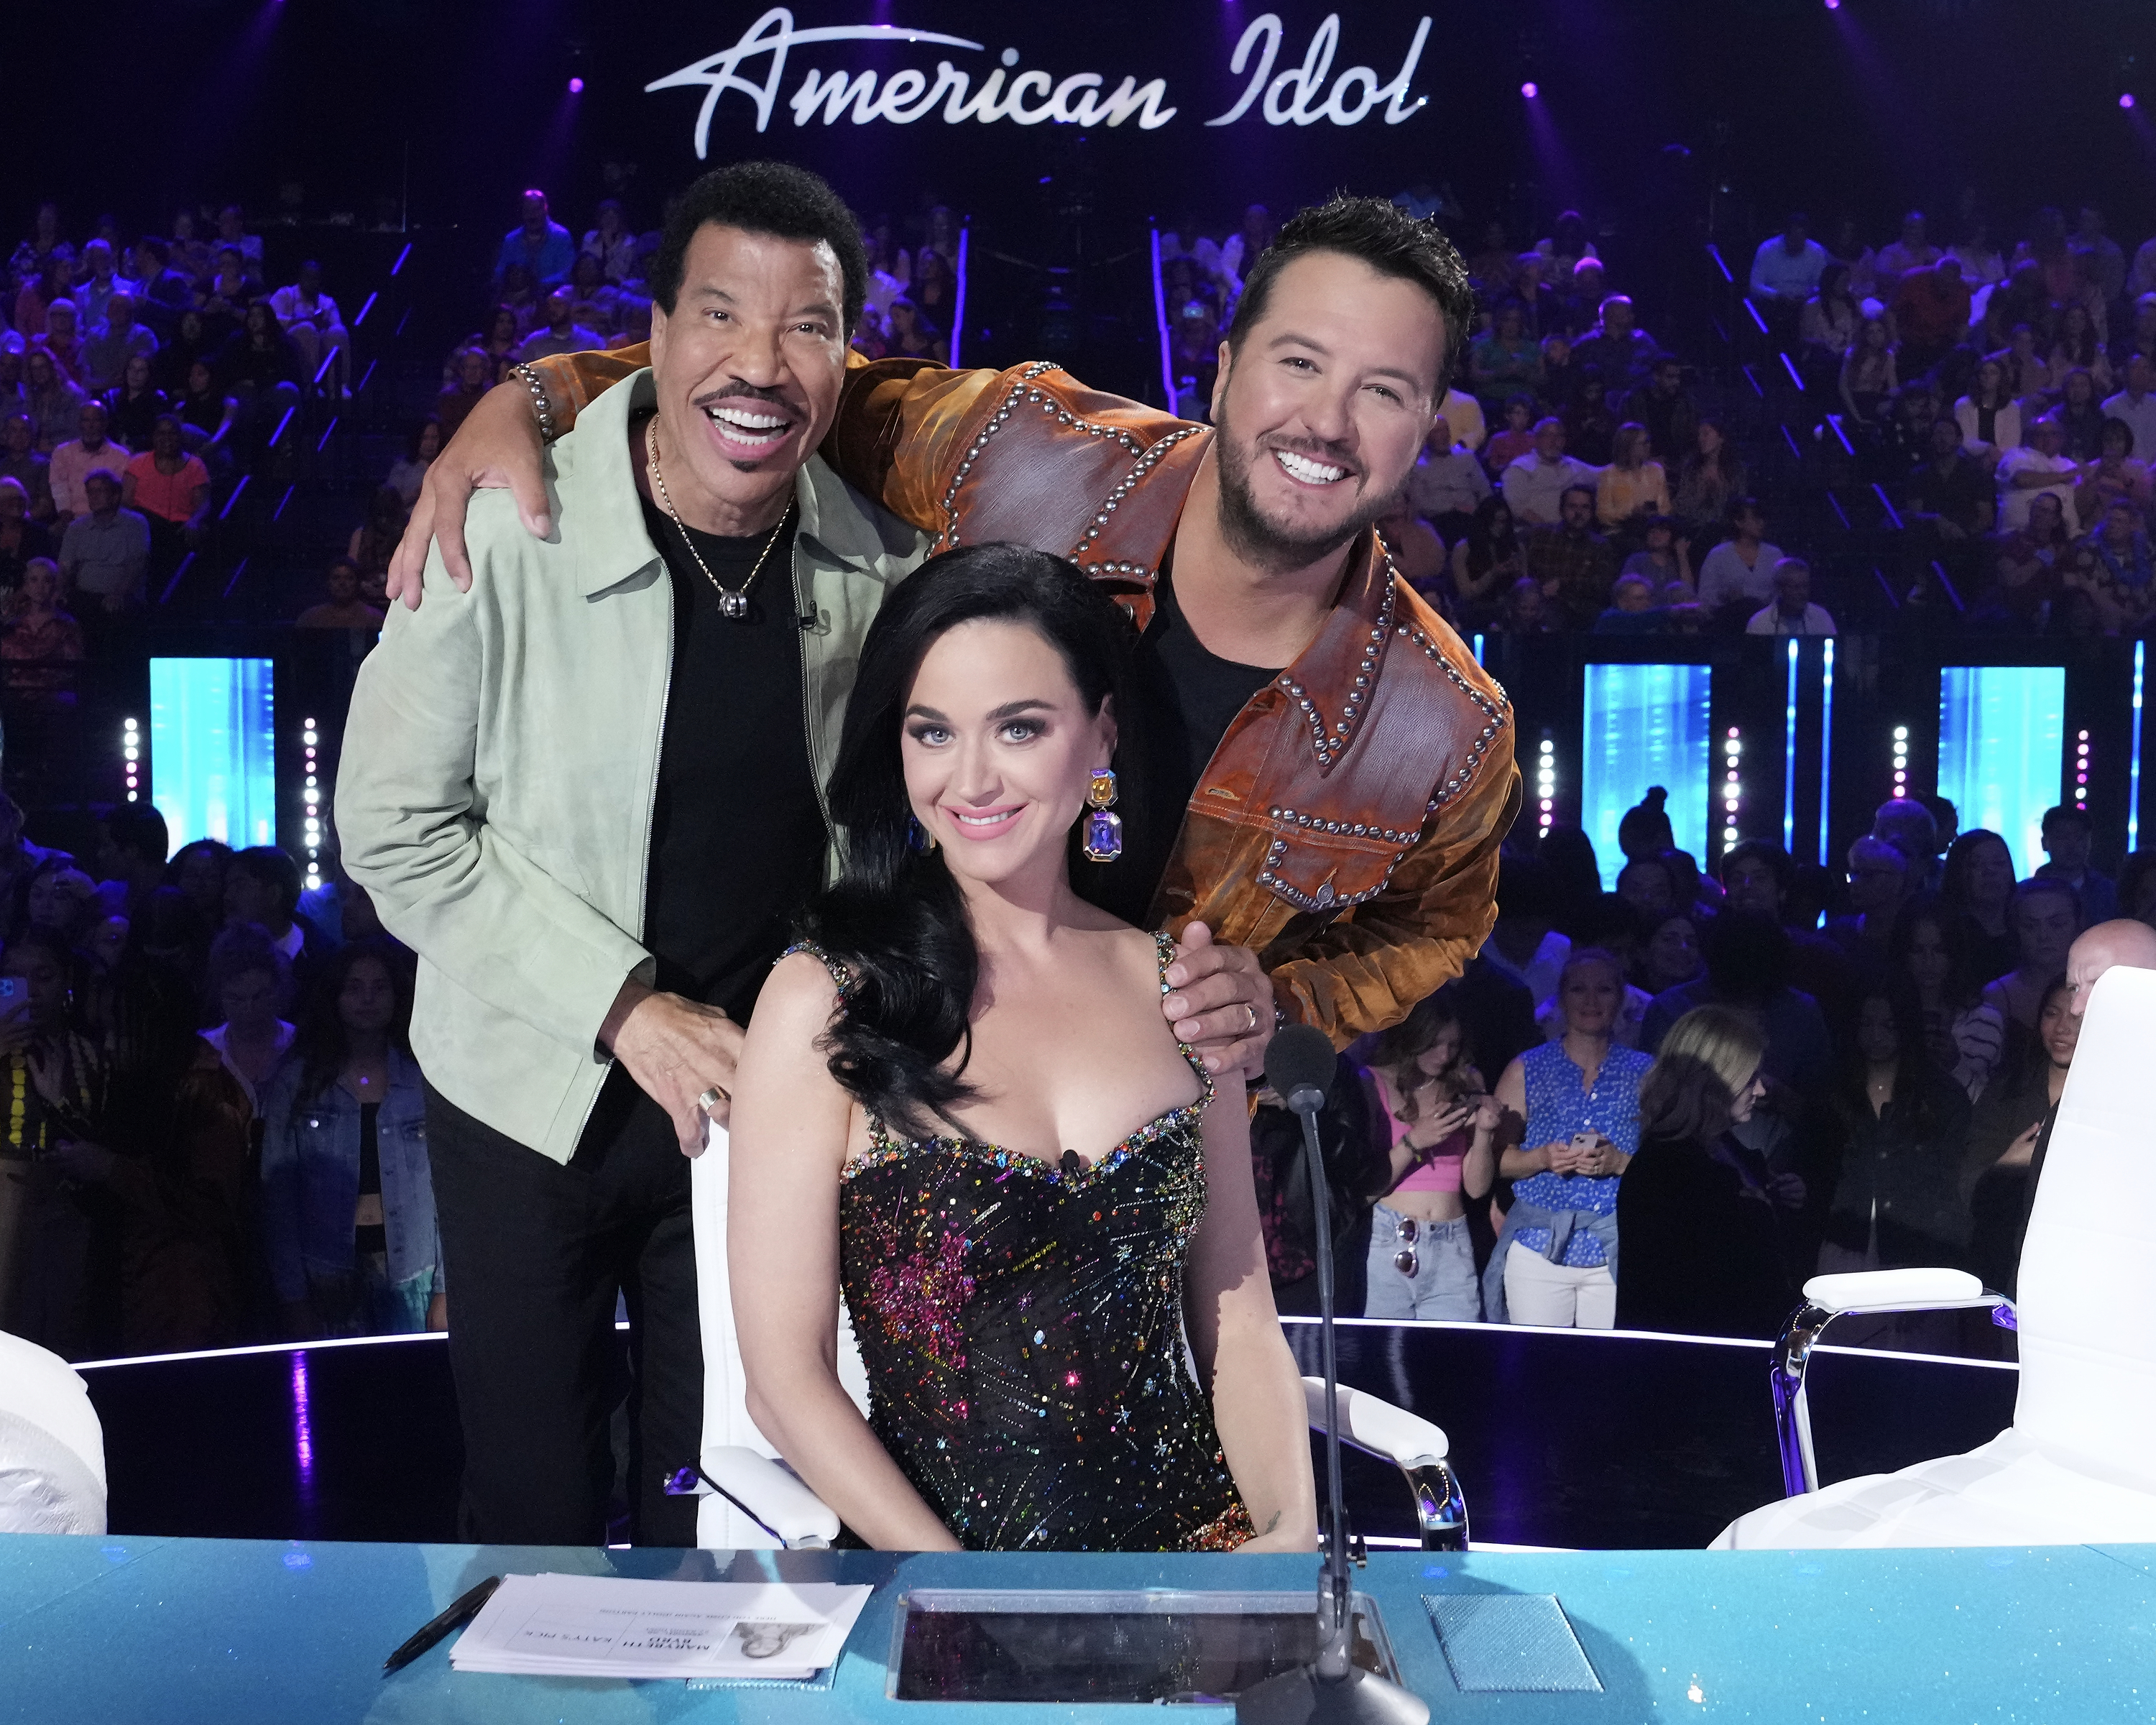 American Idol has been renewed for a seventh season on ABC